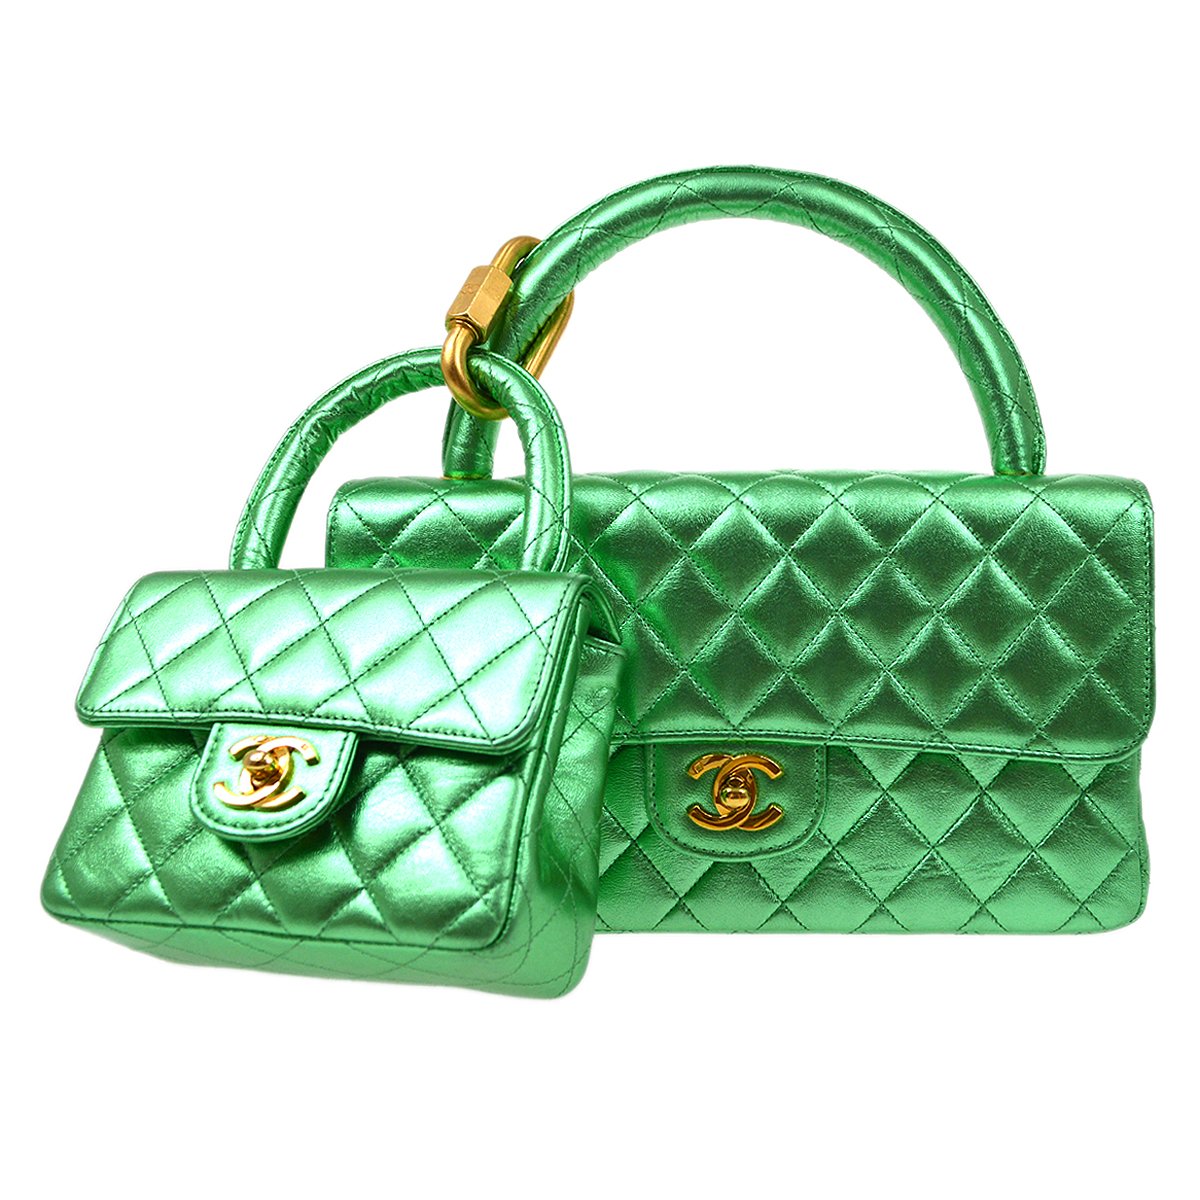 Chanel coco mini flap bag with top handle A92995 Avocado Green - $359.00